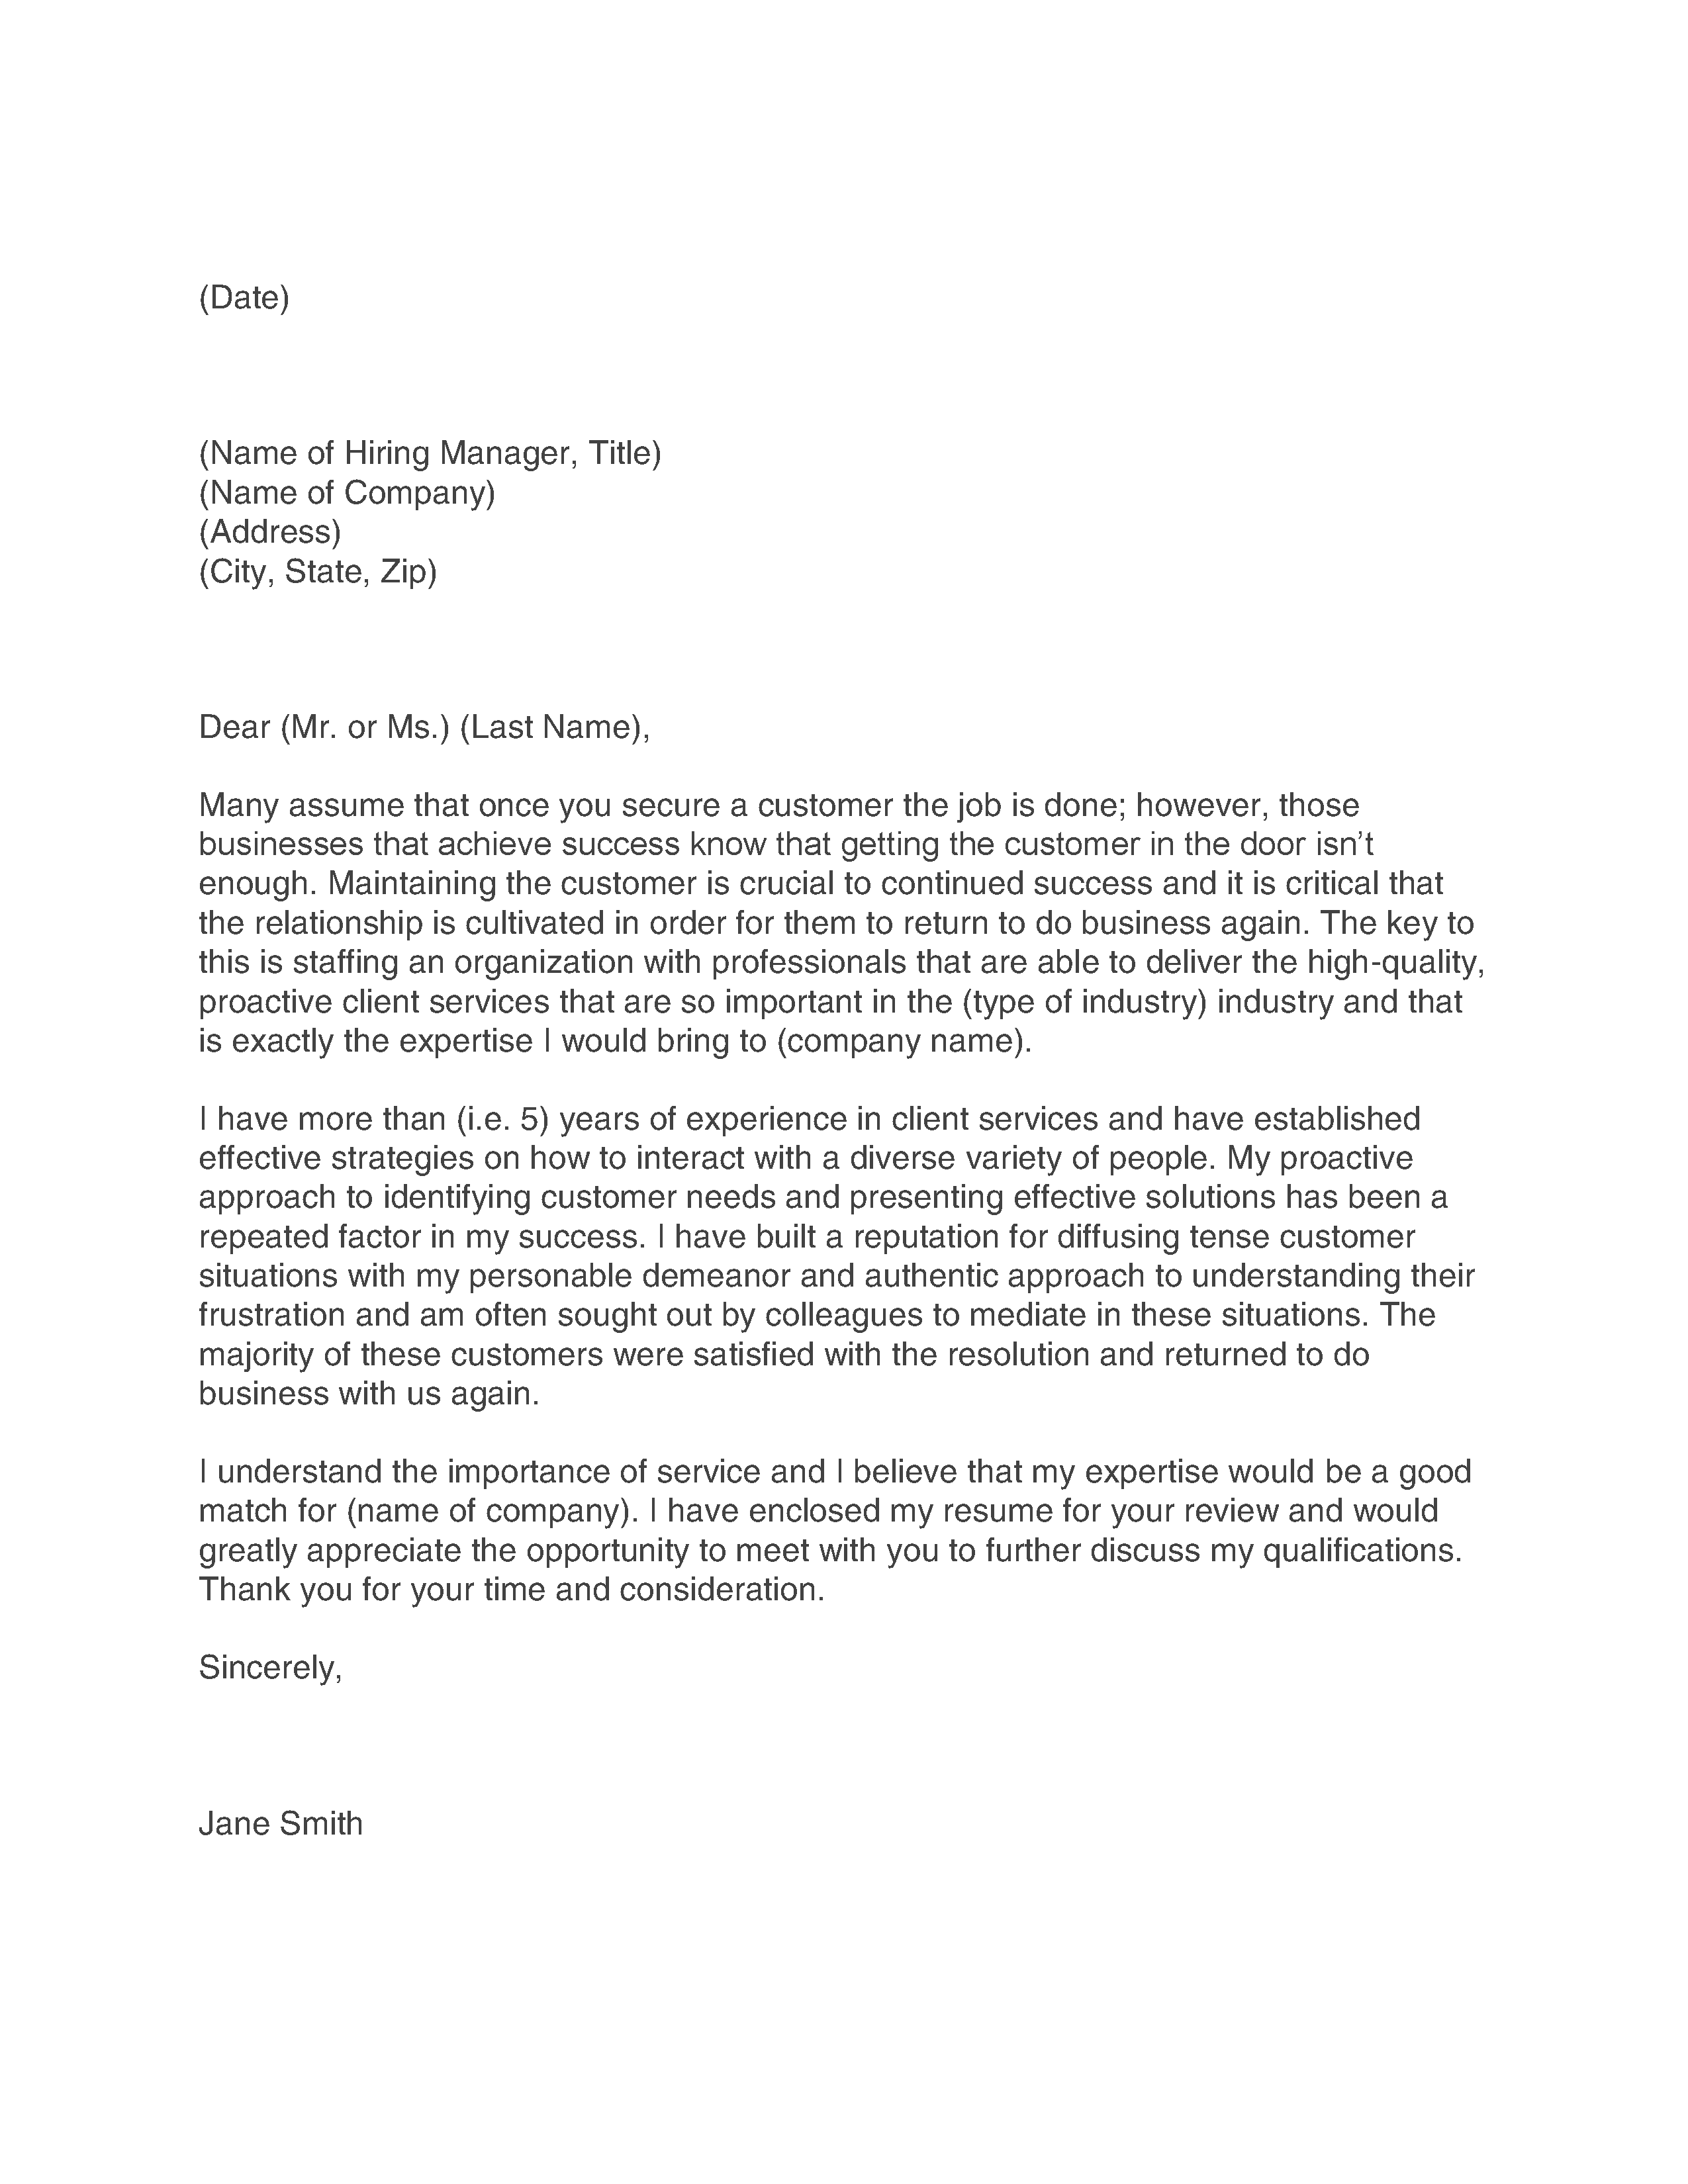 Customer Service Cover Letter (650 x 841 Pixel)